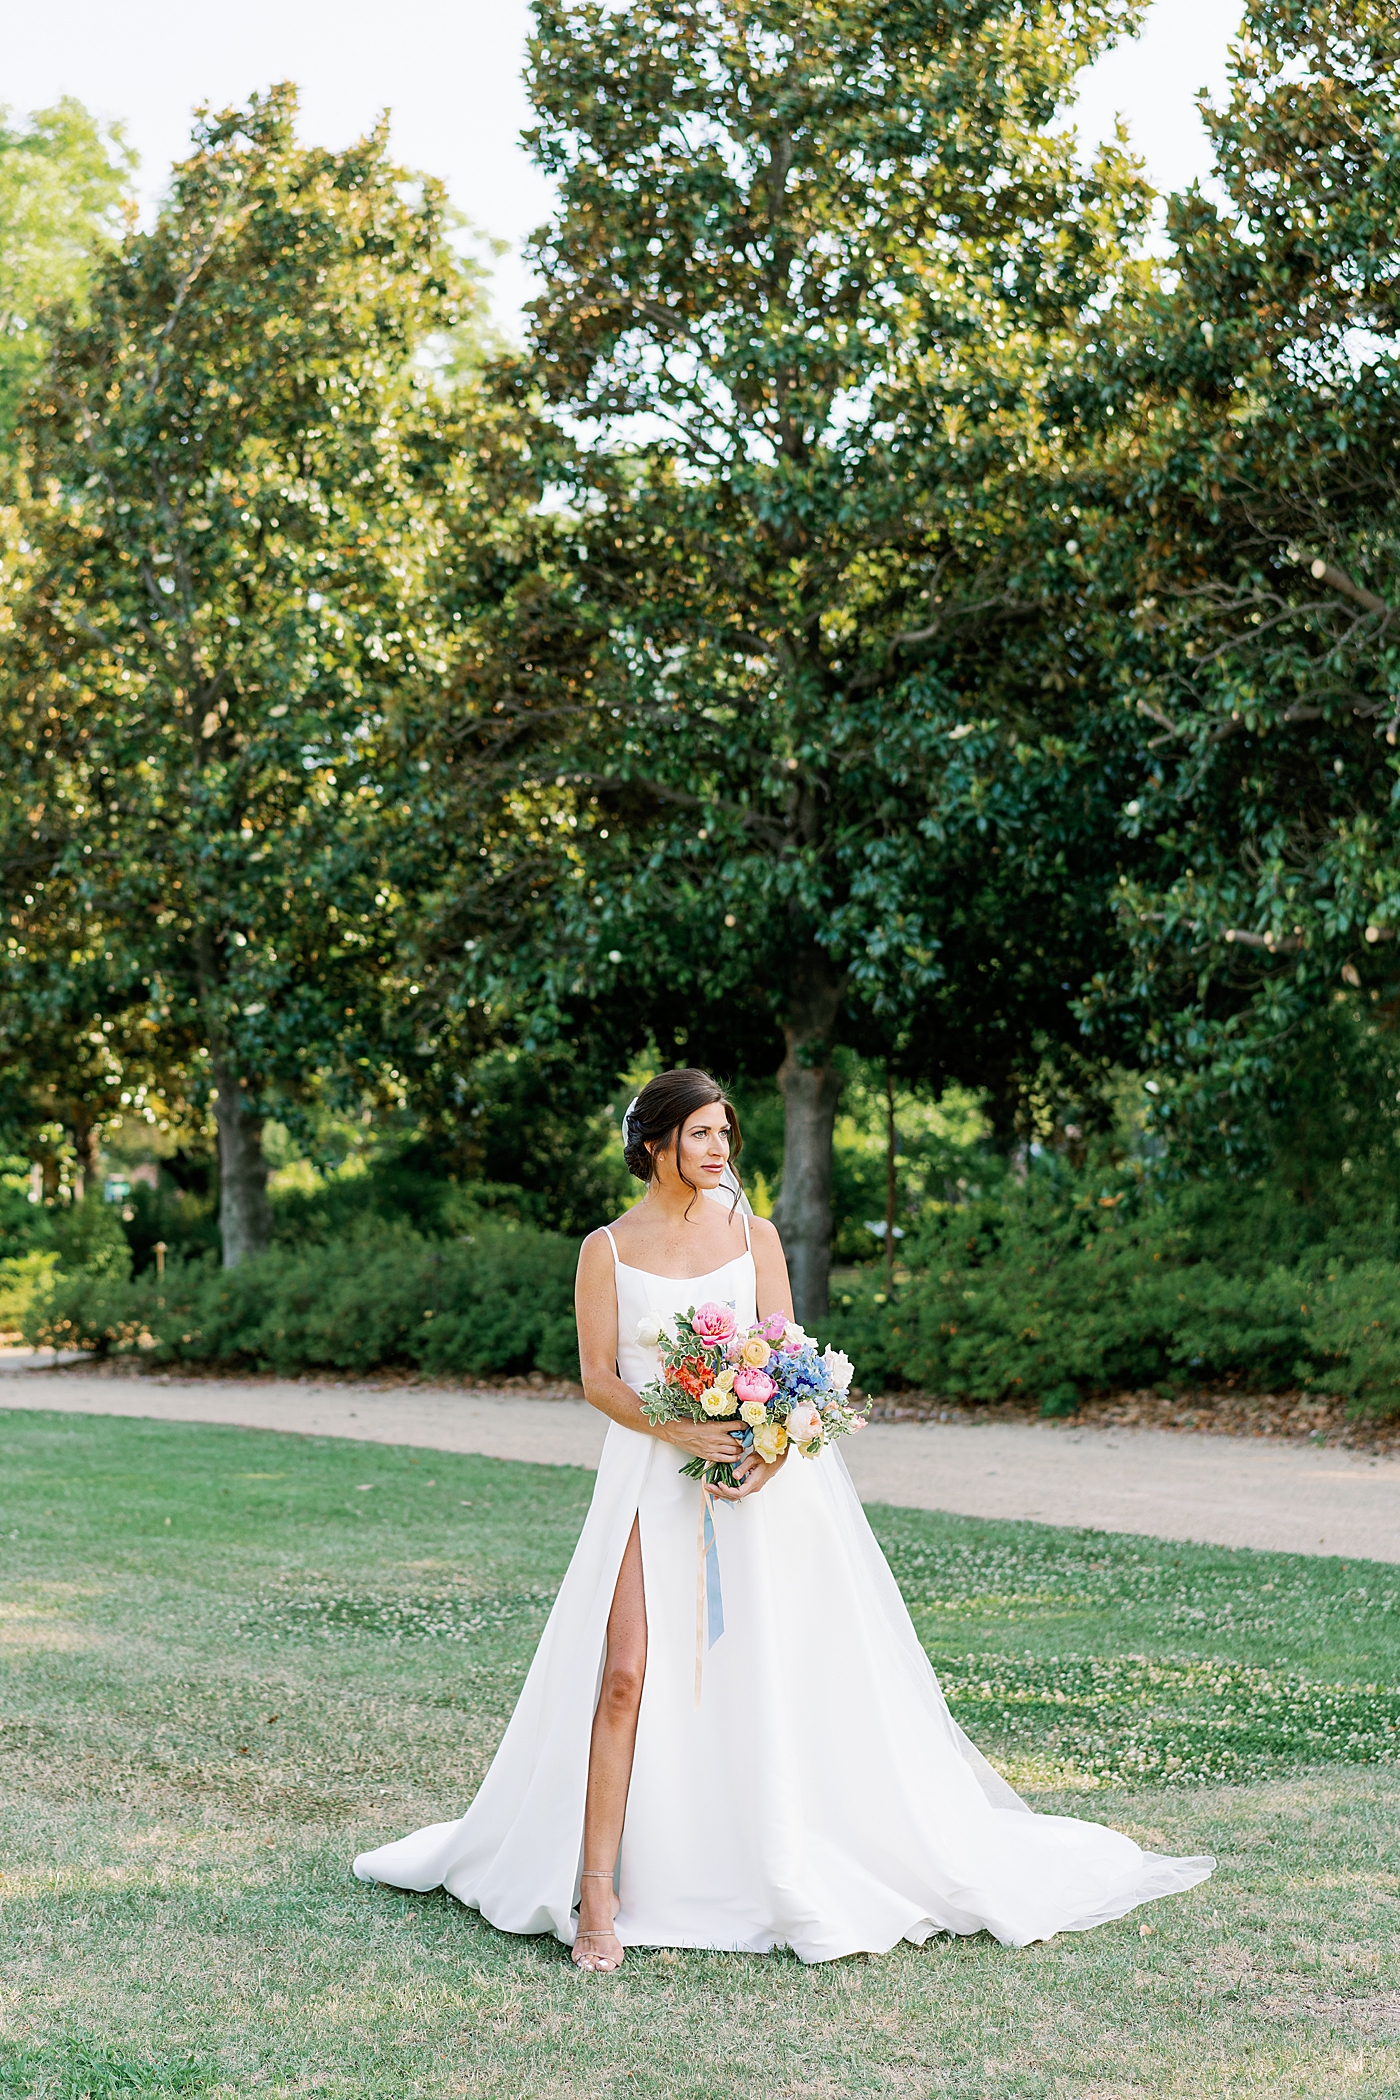 Bride holding colorful bouquet | Photo by Annie Laura Photo